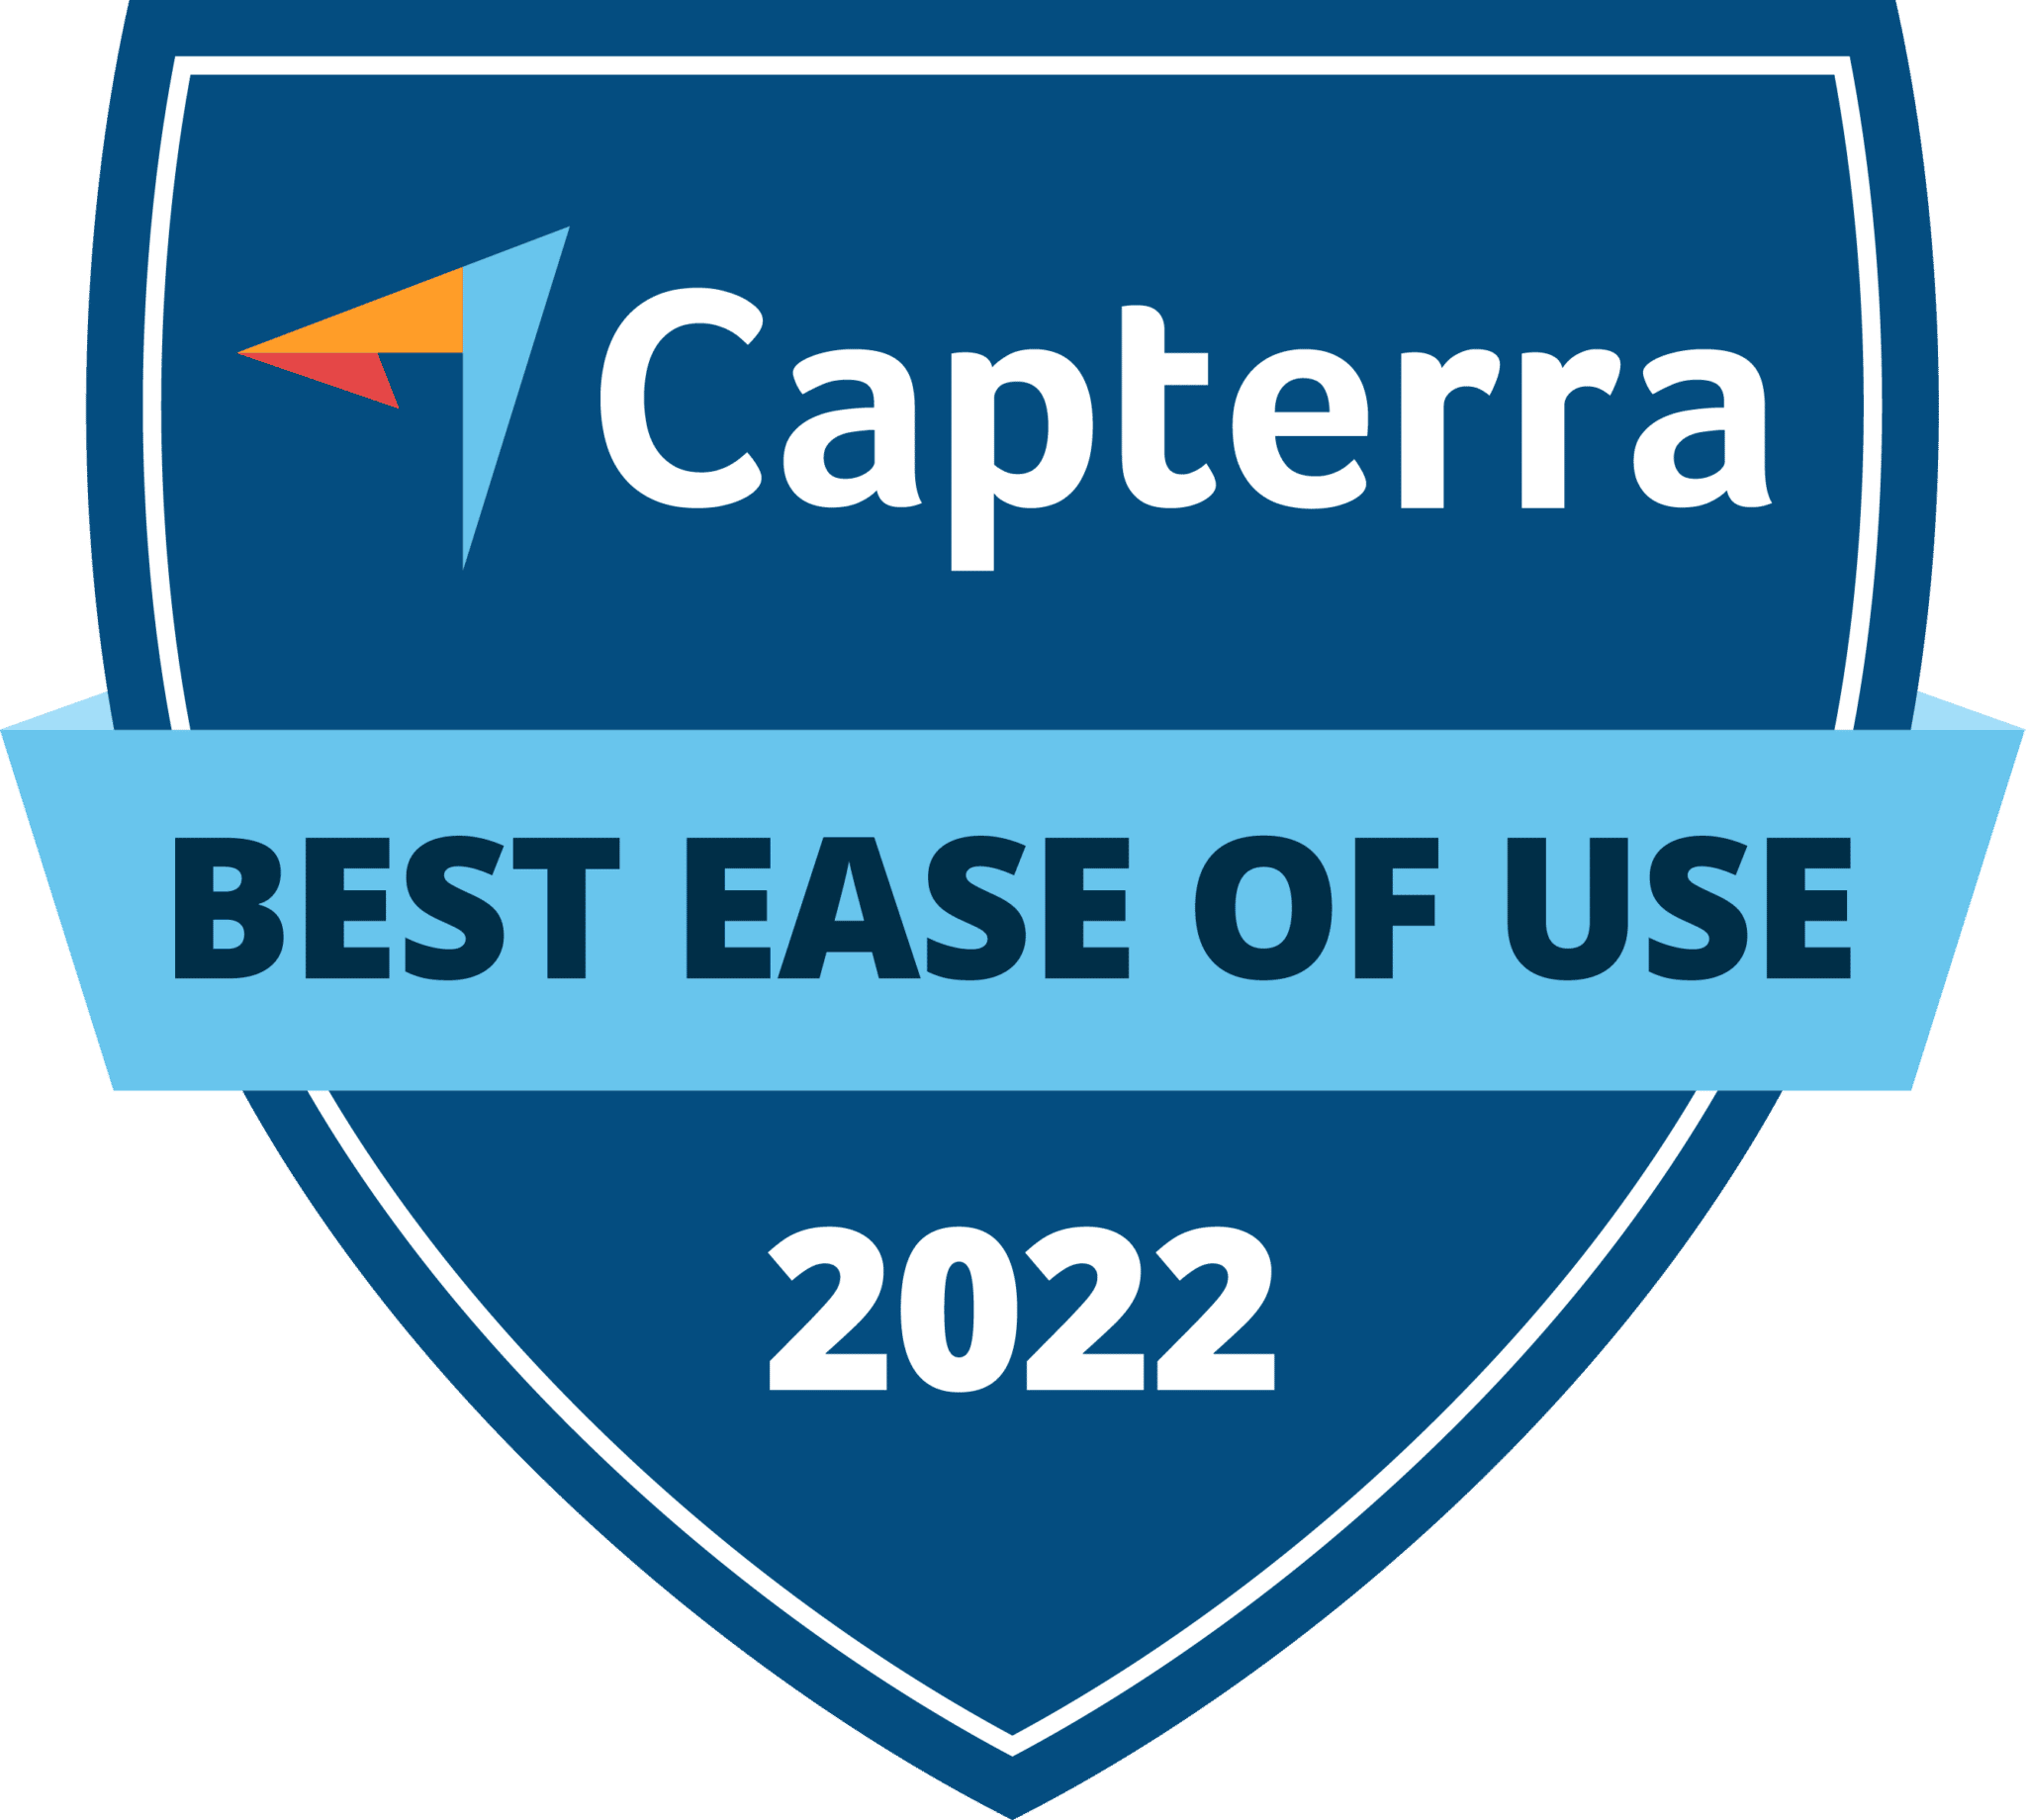 MyCase is awarded Best Ease of Use by Capterra in 2022